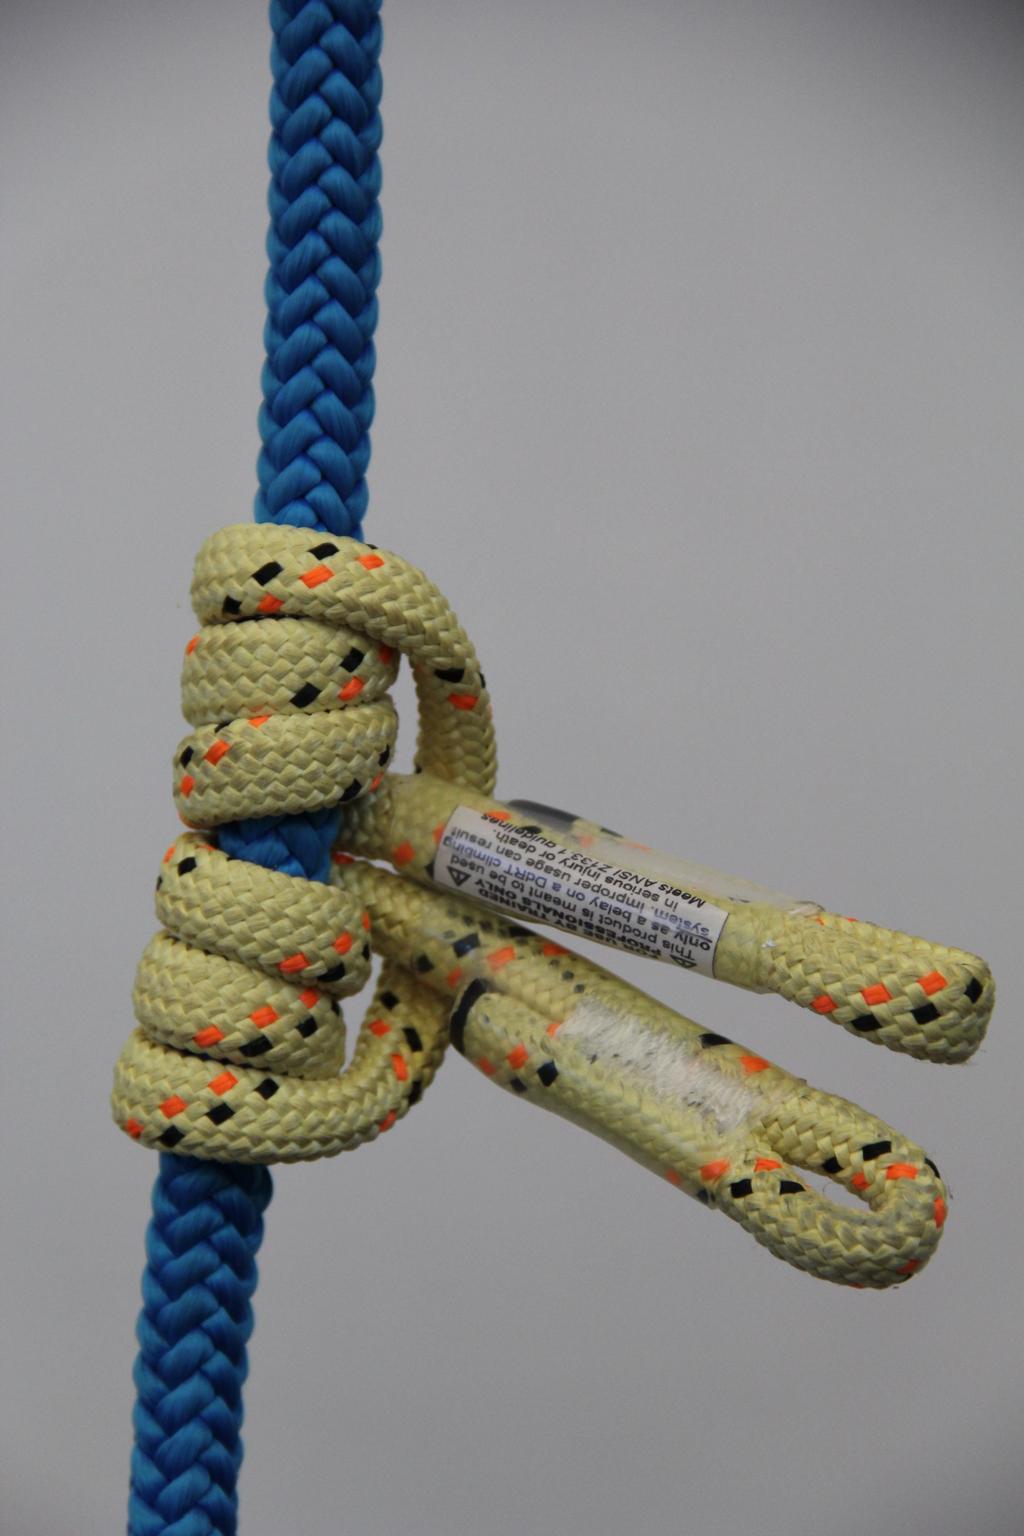 3-wrap English Prusik: this is a friction hitch used in both climbing and rigging applications. It is bidirectional in some applications.